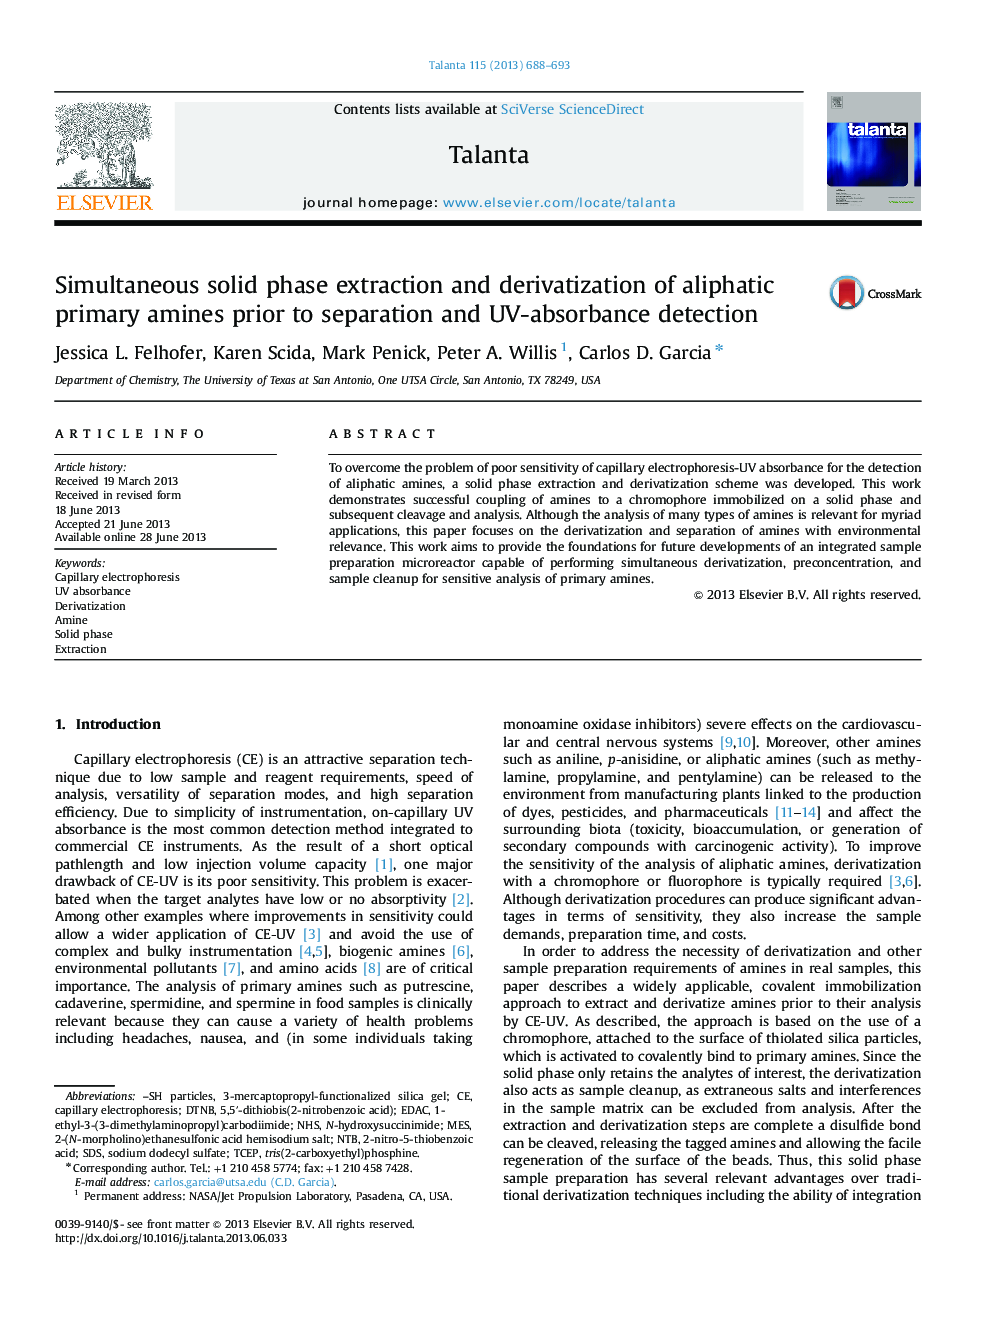 Simultaneous solid phase extraction and derivatization of aliphatic primary amines prior to separation and UV-absorbance detection